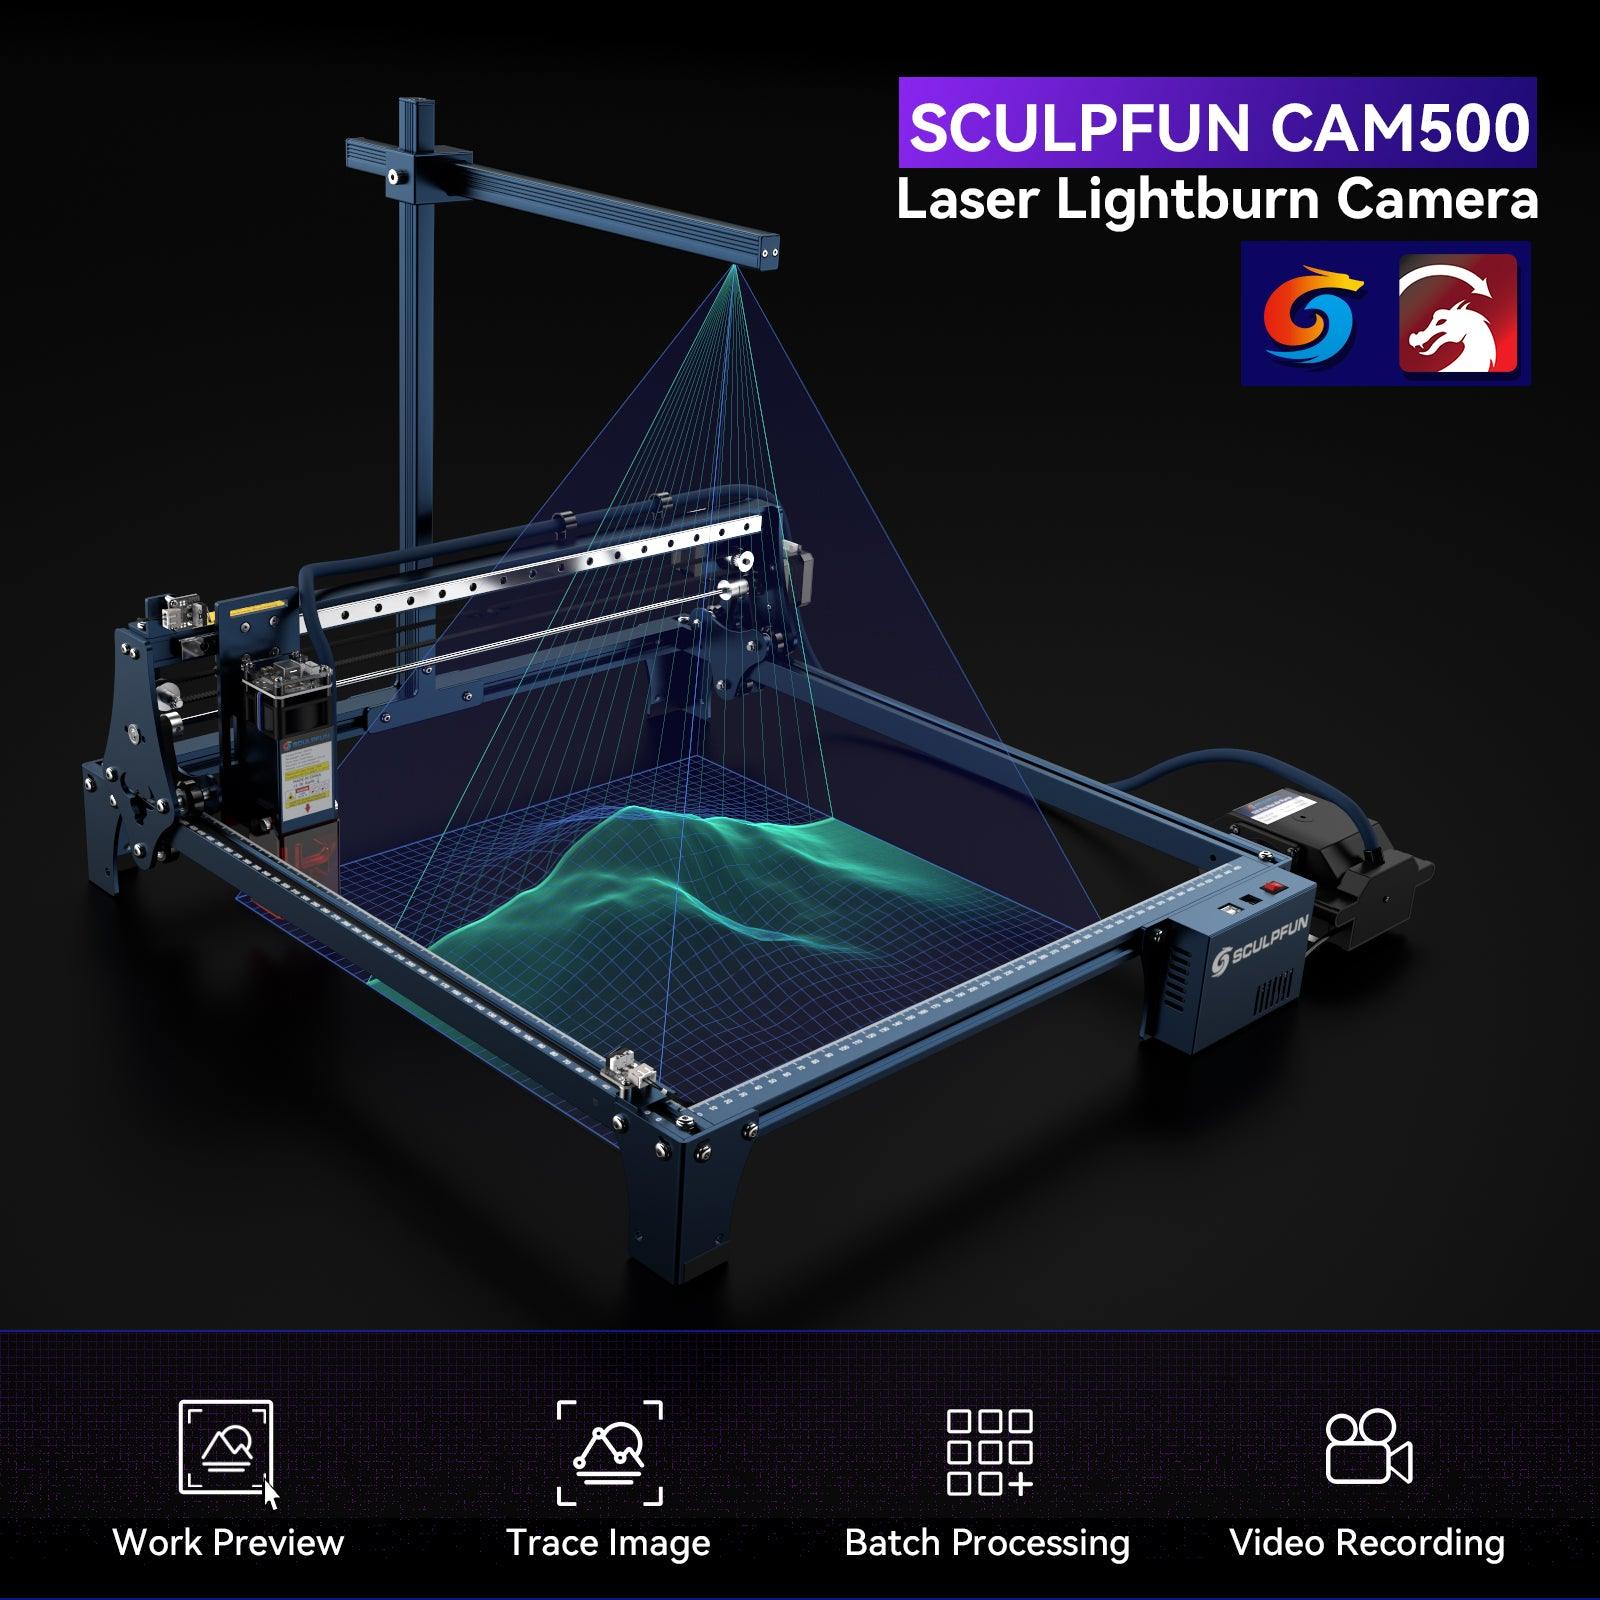 SCULPFUN CAM500 Camera 5MP Pixel Wide-angle Lens Image Tracing with 400x400mm Working Area - CREATORALLY